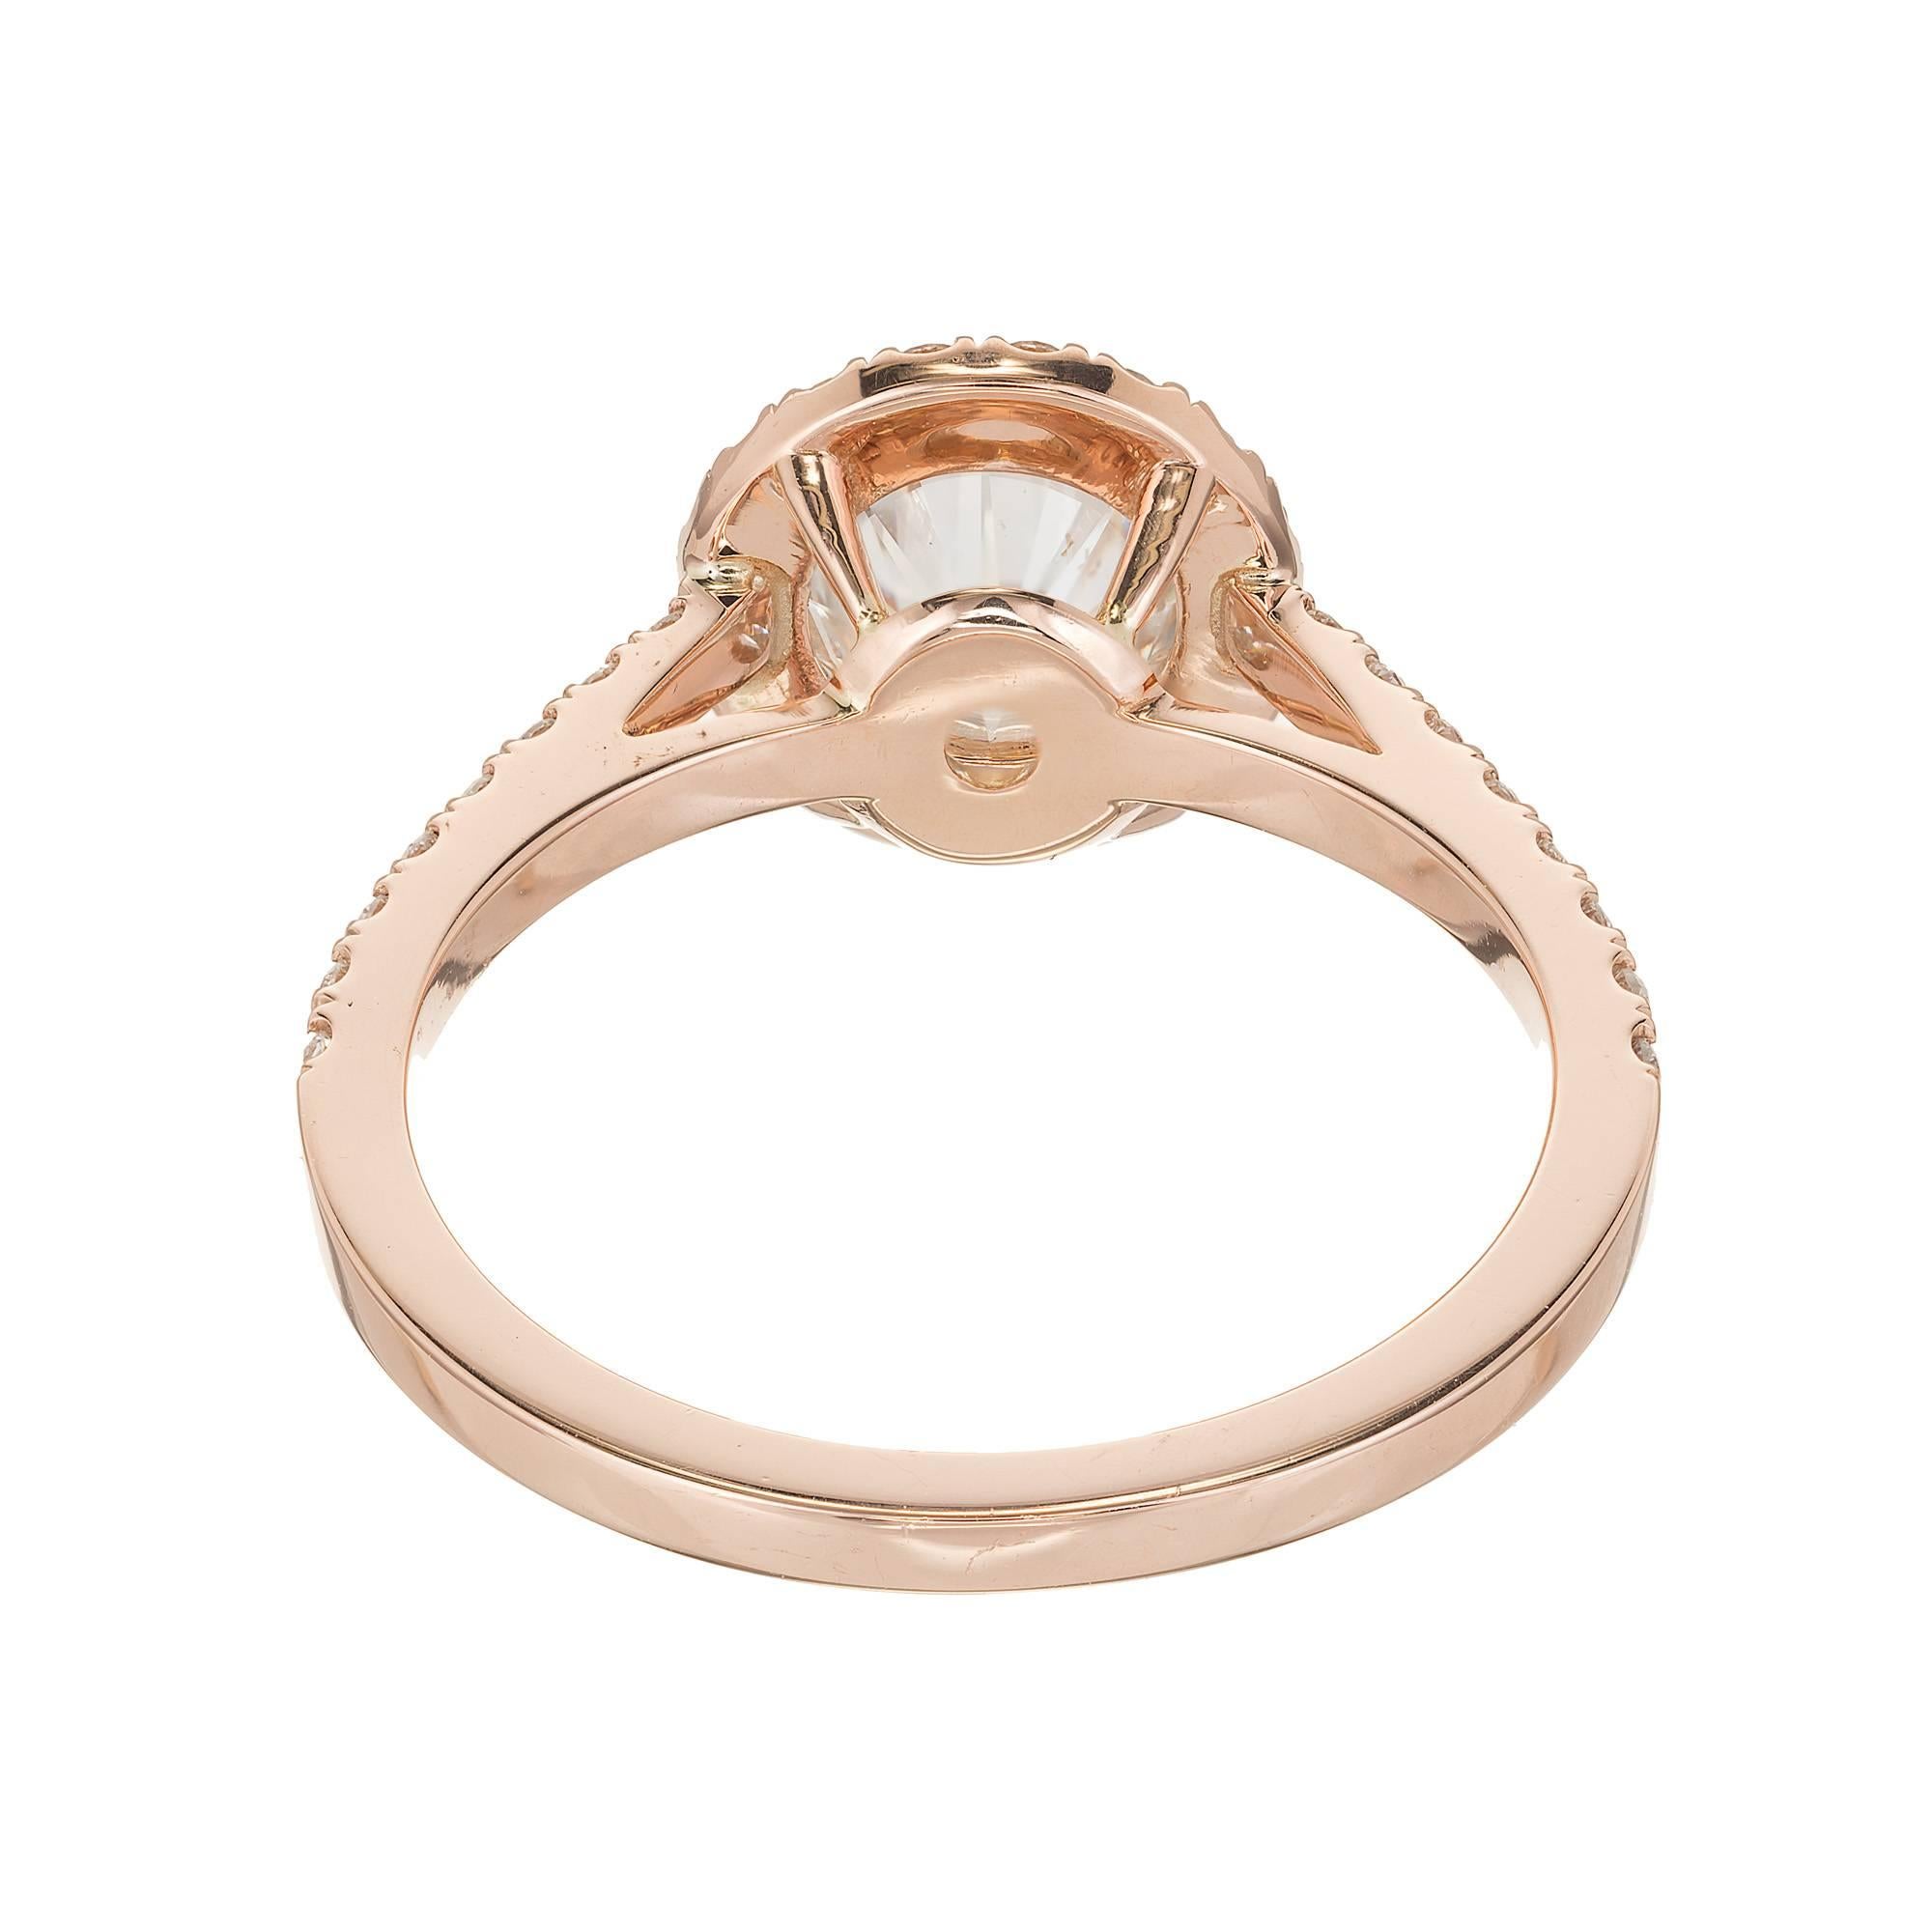 Peter Suchy Gia Certified 1.06 Carat Diamond Halo Rose Gold Engagement Ring For Sale 4